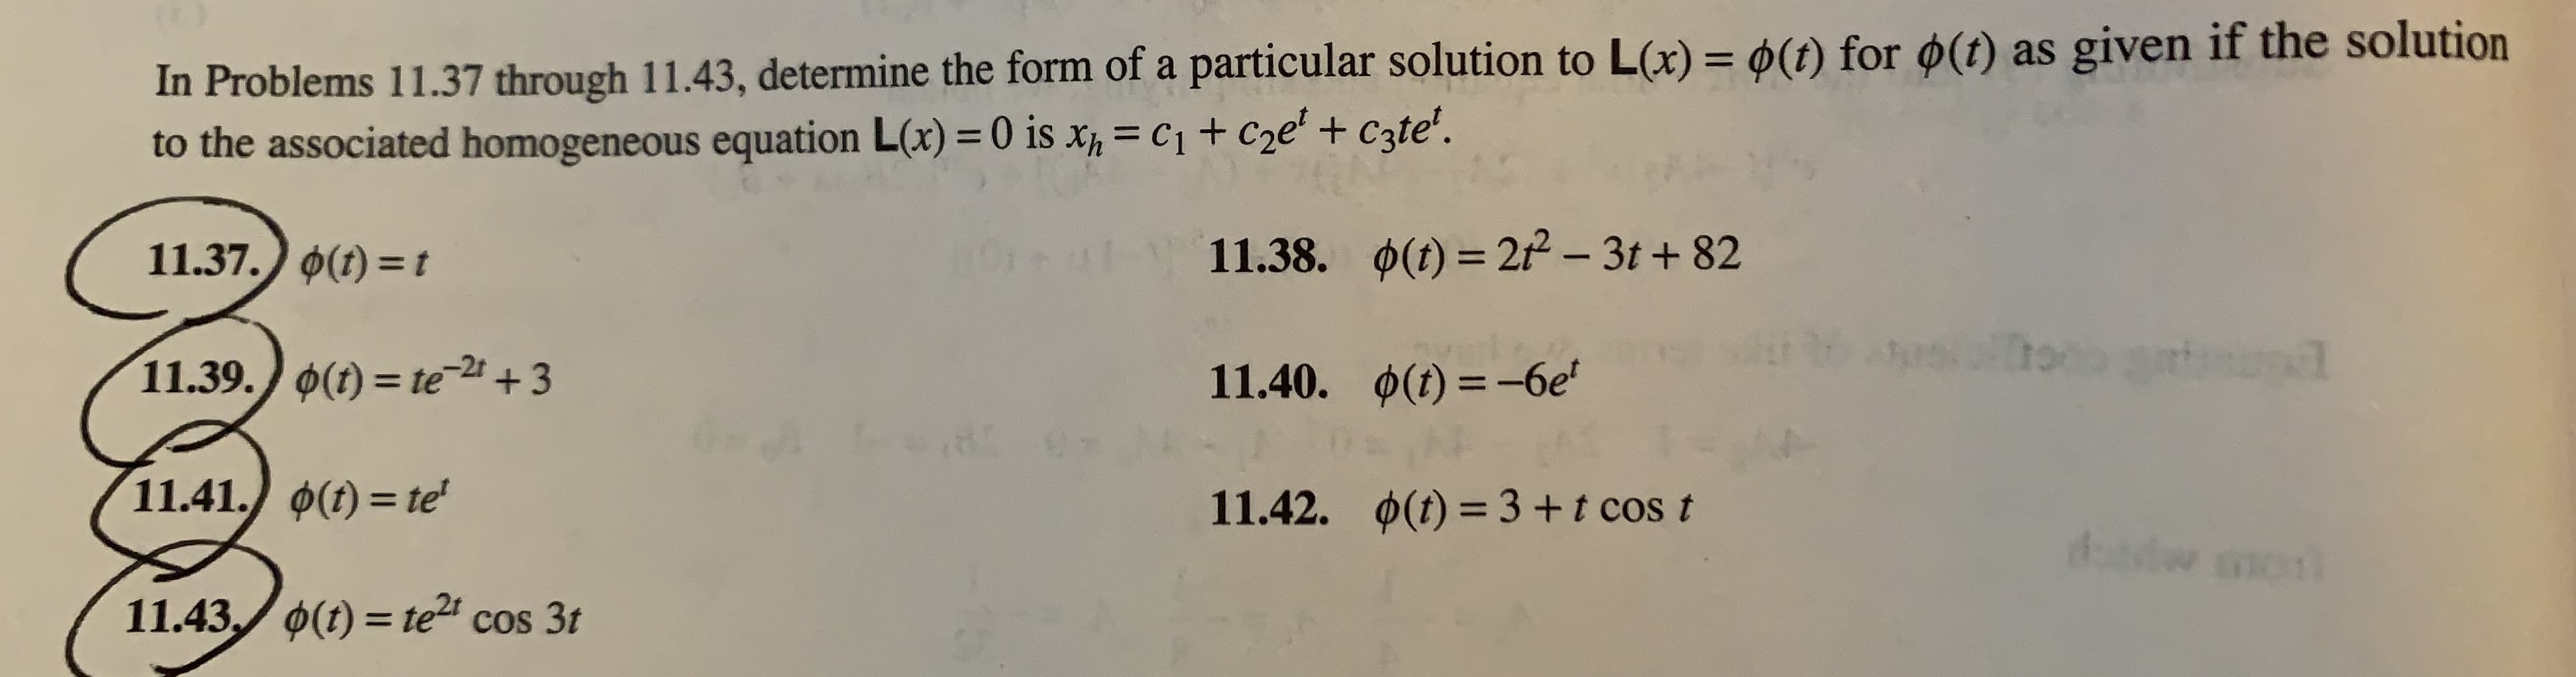 In Problems 11.37 through 11.43, determine the form of a particular solution to L(x) = 0(t) for ø(t) as given if the solution
to the associated homogeneous equation L(x) = 0 is x = C1 + C2e' + Czte'.
%3D
0(t) = 21 - 3t + 82
11.37.) 0(1) = t
11.38.
%3D
11.39. 0(1) = te2+3
11.40. 0(t) =–-6e'
%3D
%3D
11.41. 0(t) = te'
0(t) = 3+t cos t
11.42.
dasdw mont
11.43./ 0(t) = te" cos 3t
